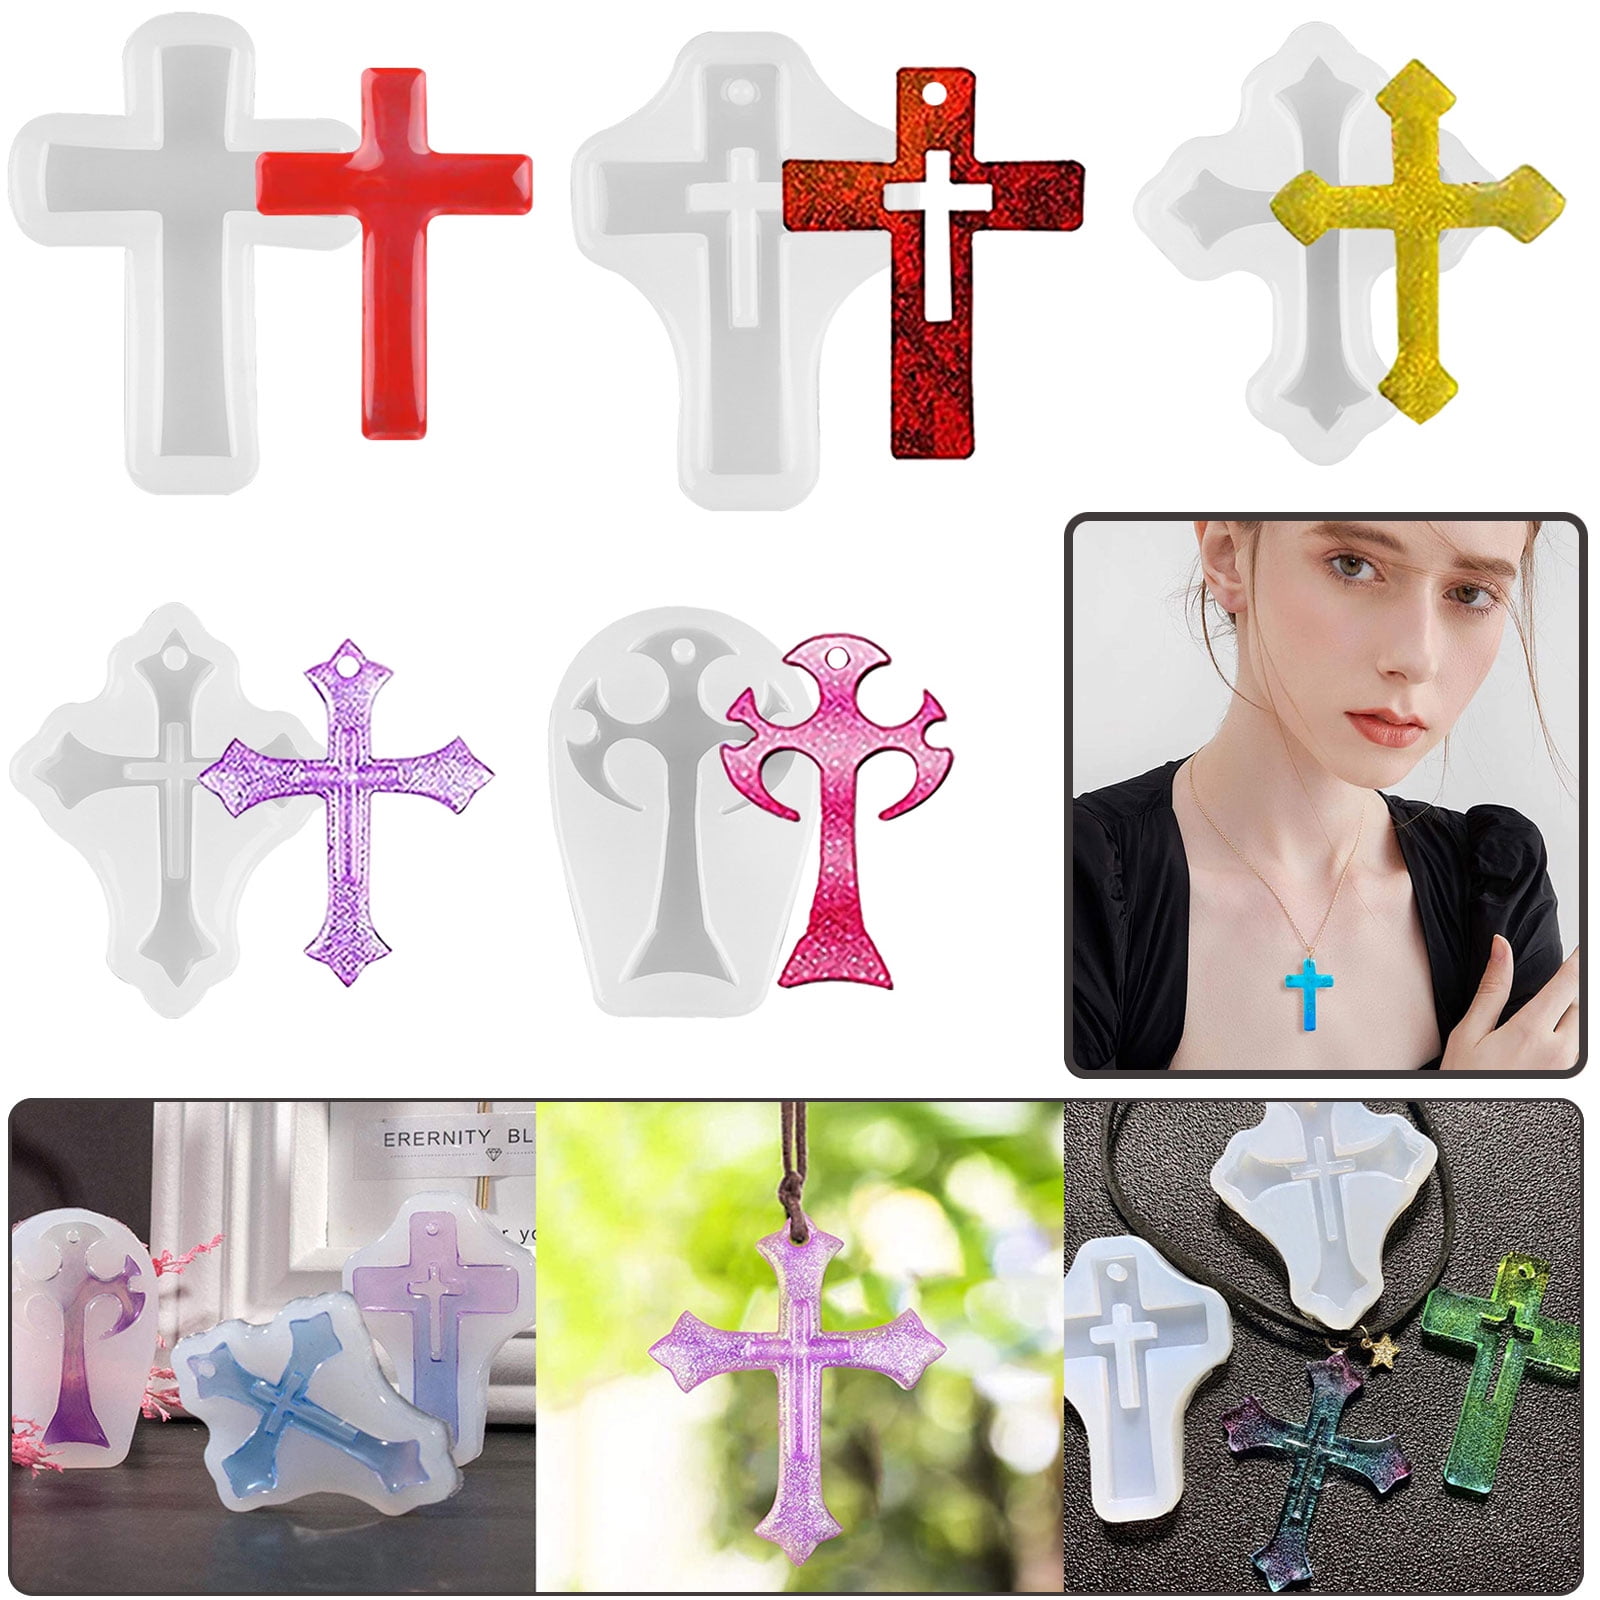 Lcacay Cross Resin Molds, 12 Cross Shape with Hole Silicone Mold for Epoxy Resin Casting, Key Chain, Pendant, Necklace, Earring, Charms, Jewelry Making, DIY